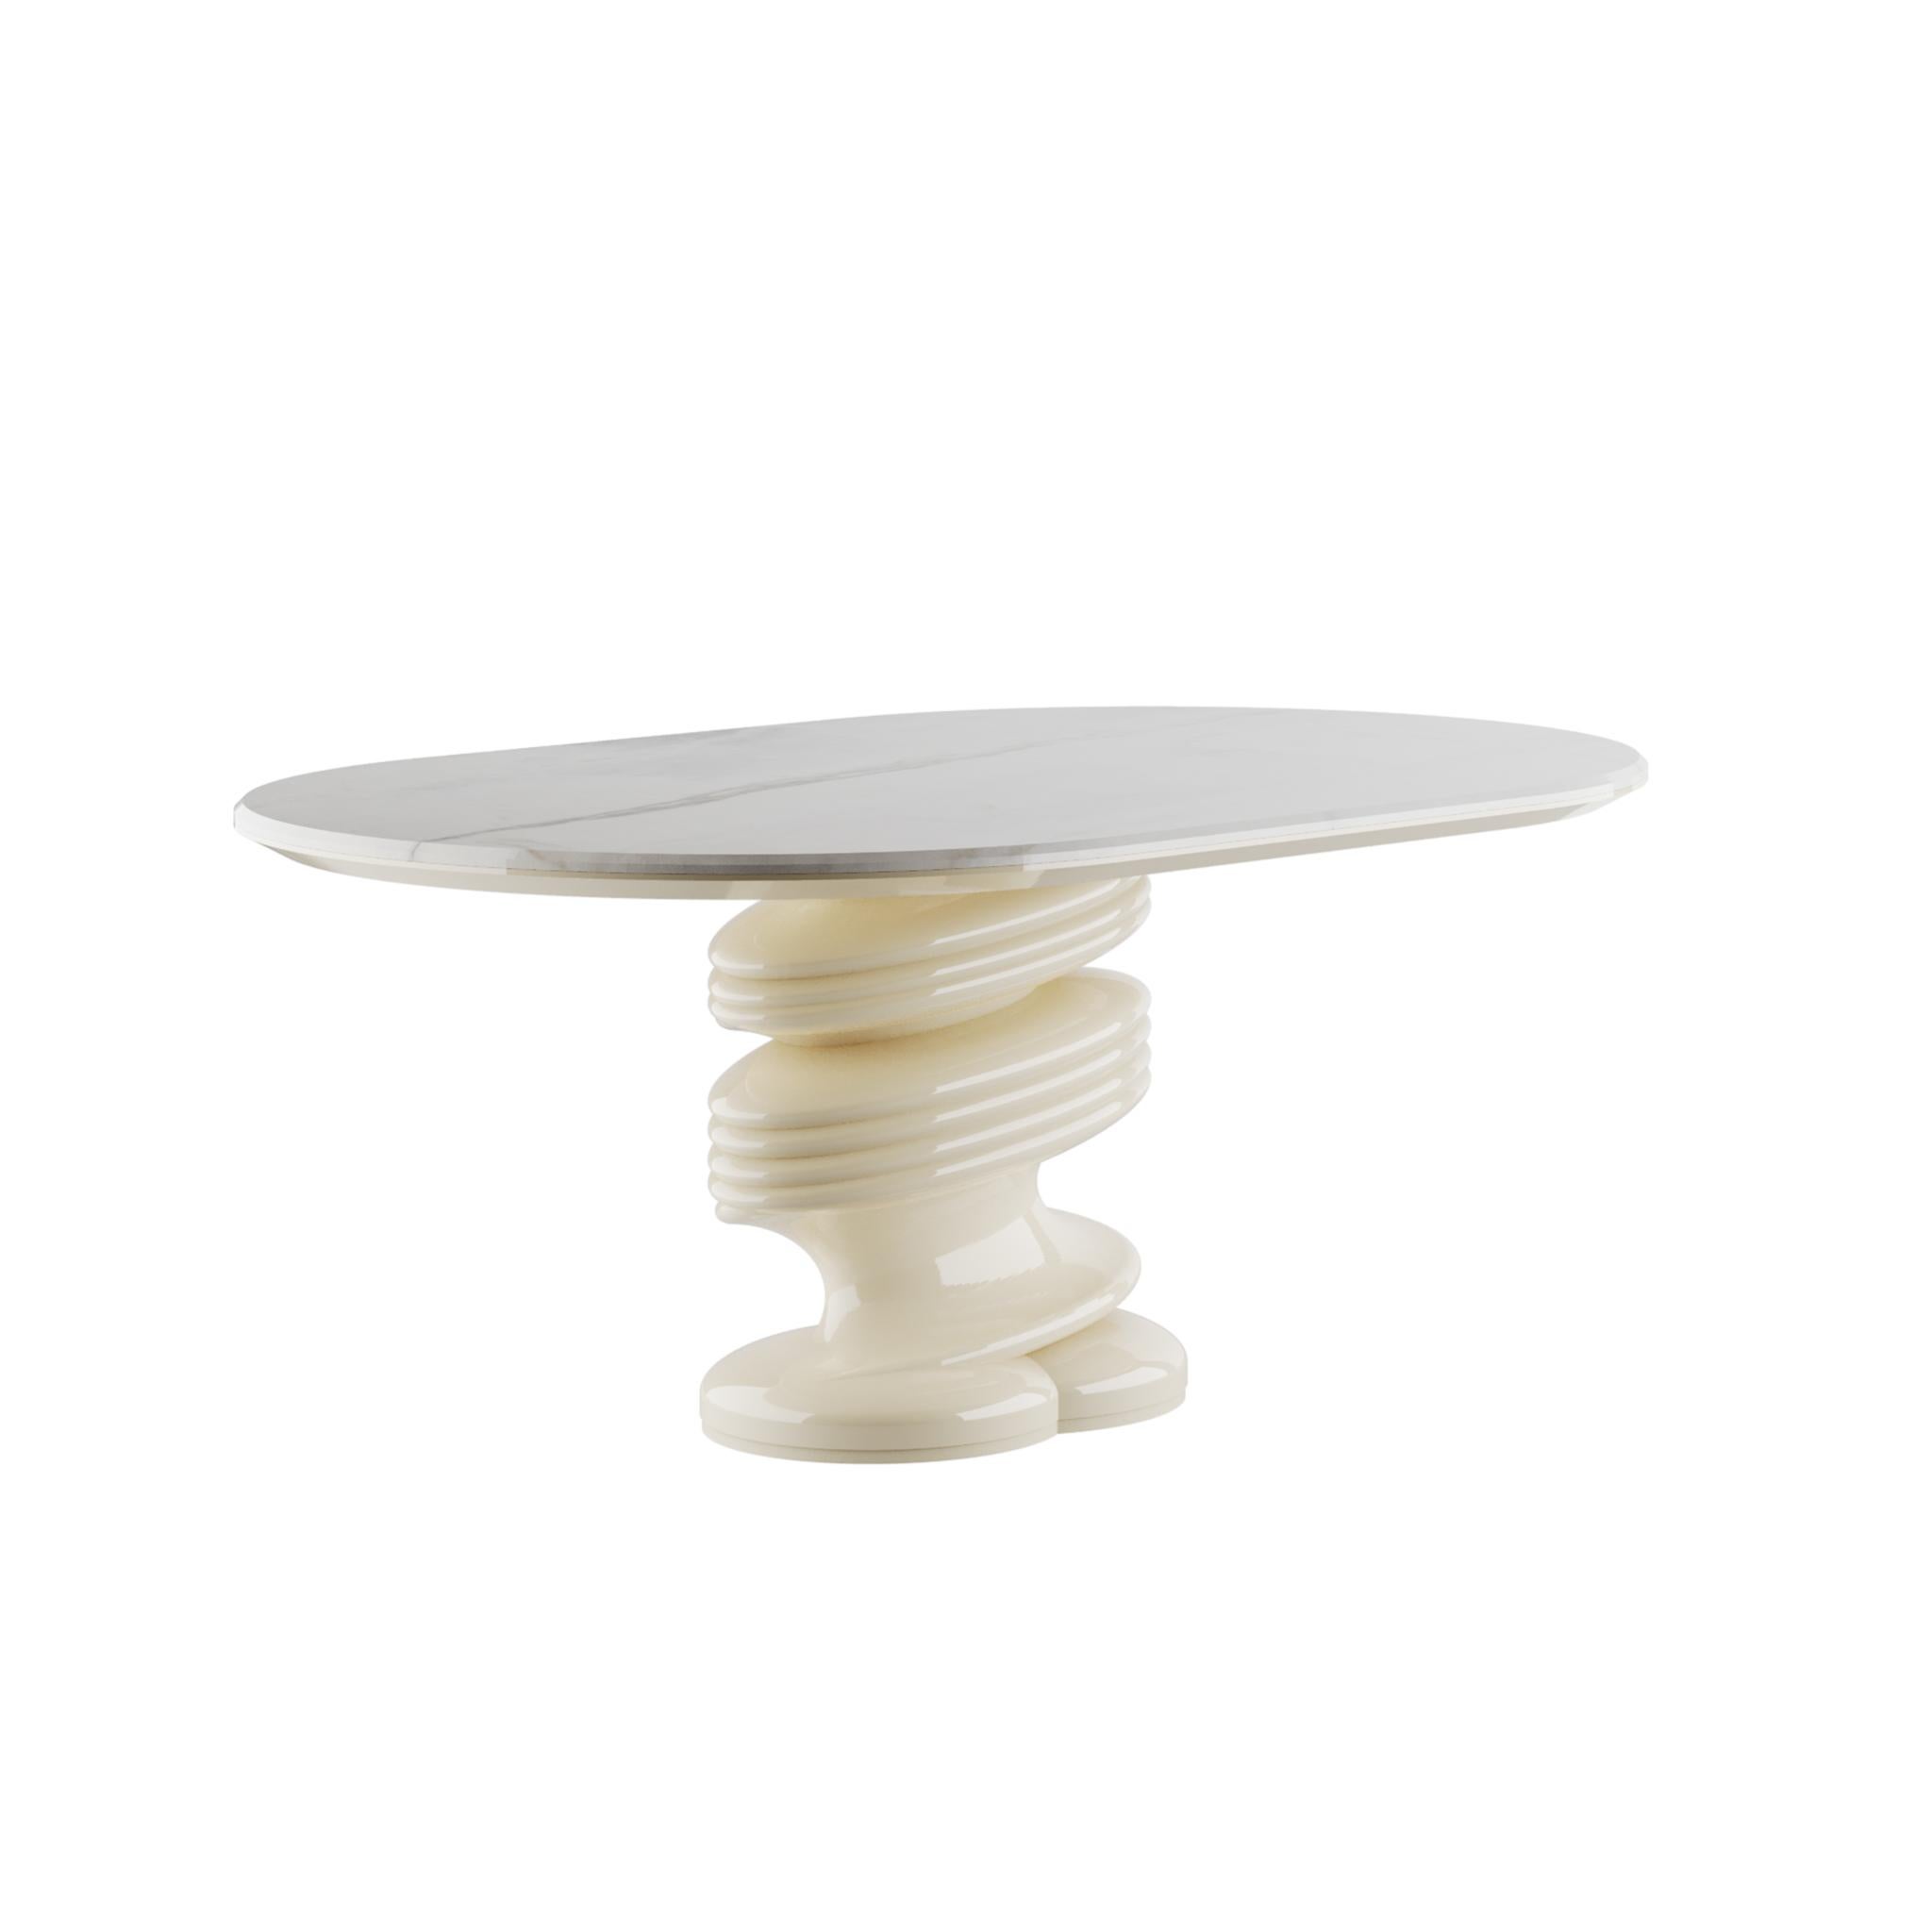 Modern Dining Table, White Marble Top with Twisted Sculptural White Base
Muller Dining Table breathes modernity. It’s a modern dining table with a fun twist and a minimalist take due to the expected combination of a sculptural base and a pristine